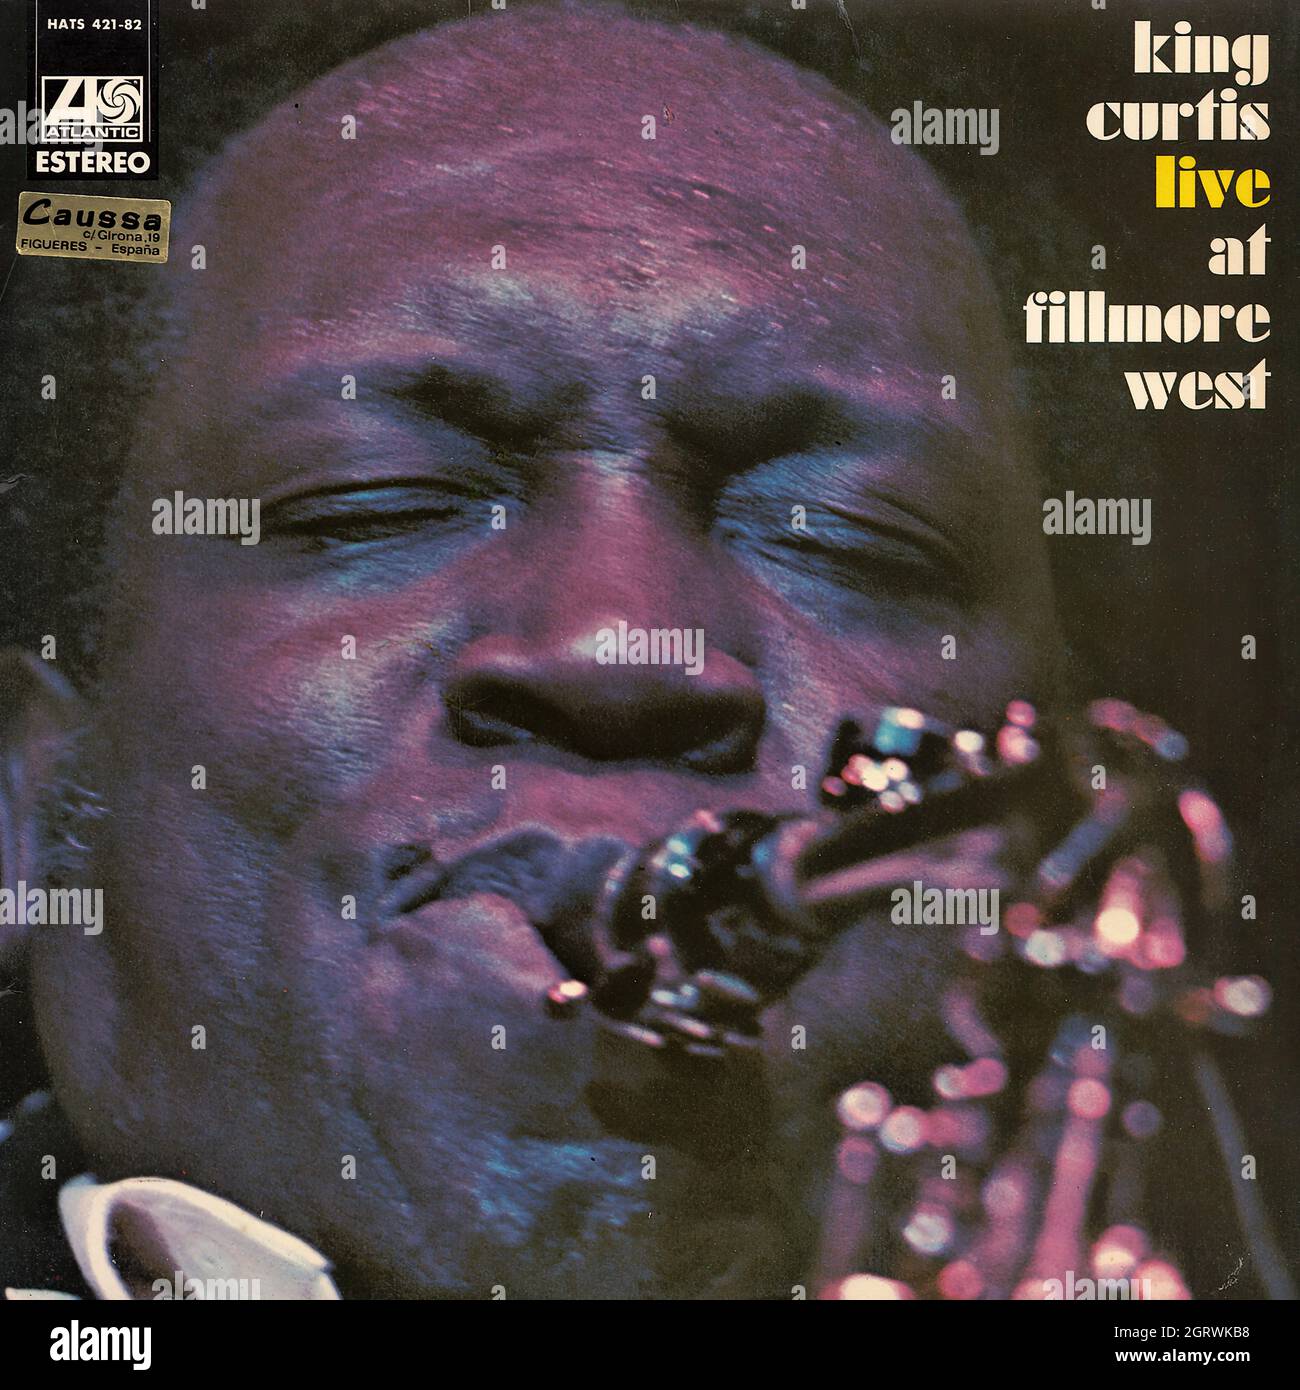 King Curtis - Live at Fillmore West - Vintage Vinyl Record Cover Stock Photo